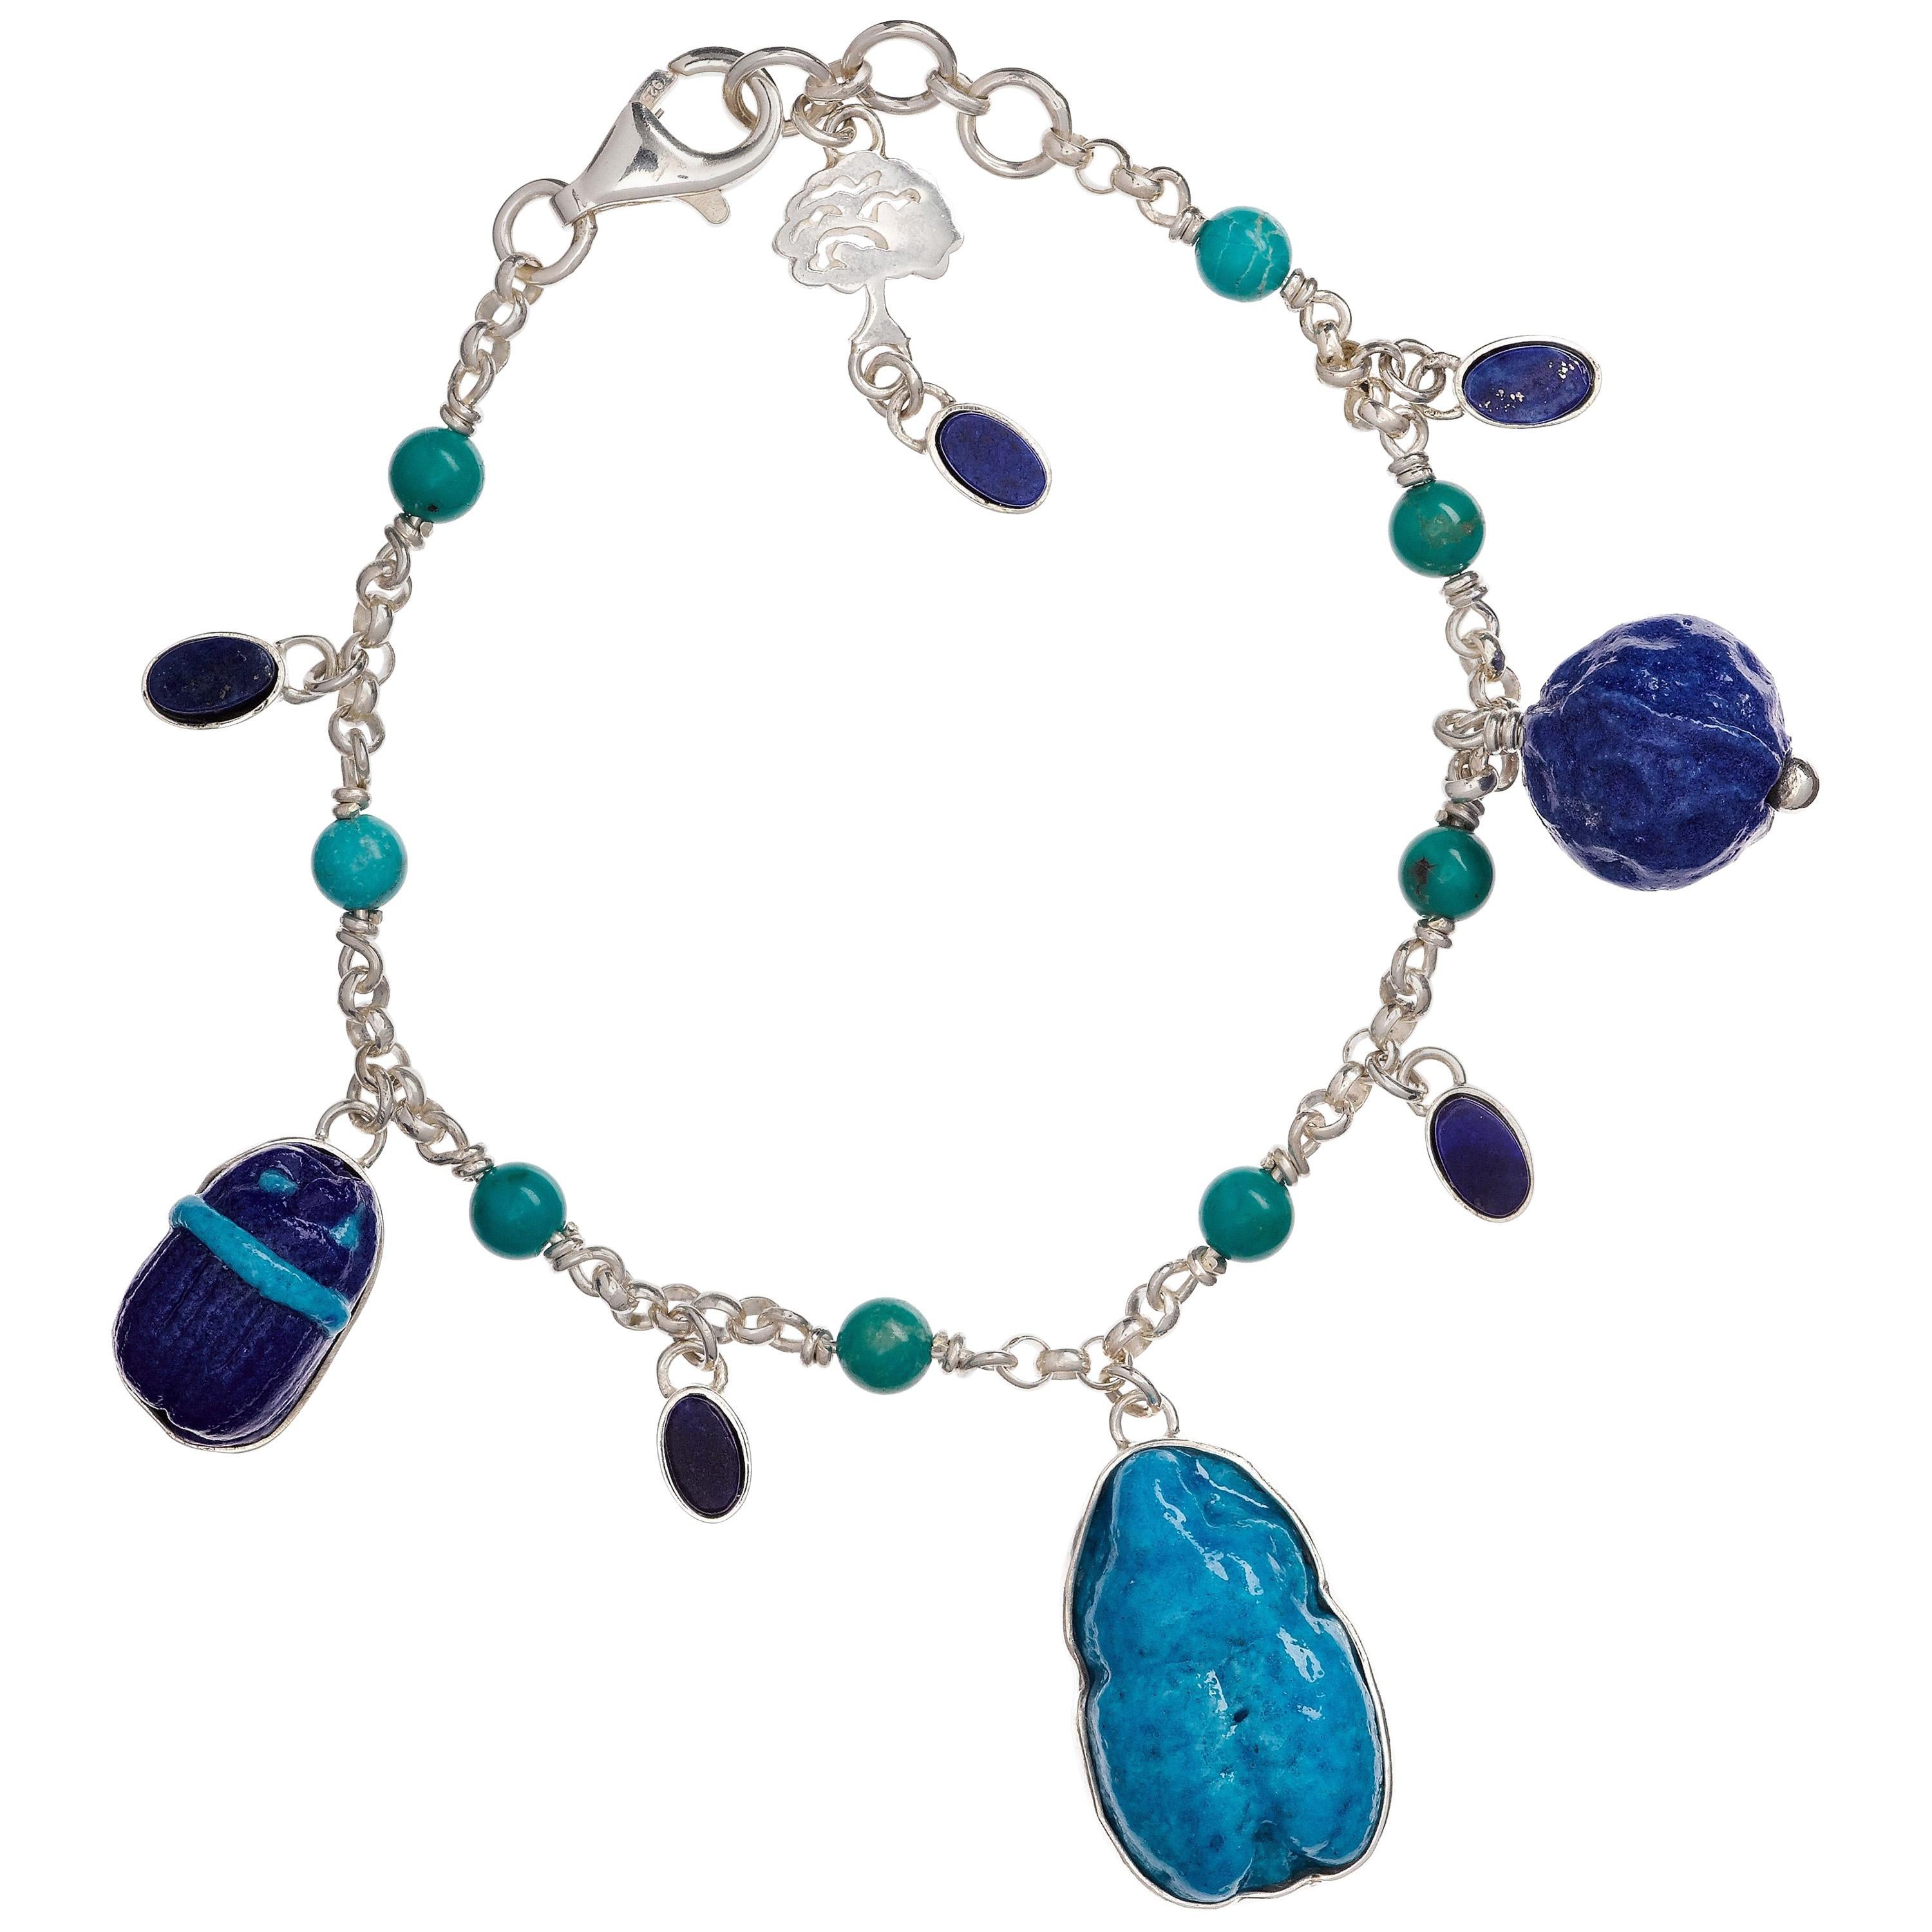 Egyptian Faience Charm Bracelet with Lapis and Turquoise Accents